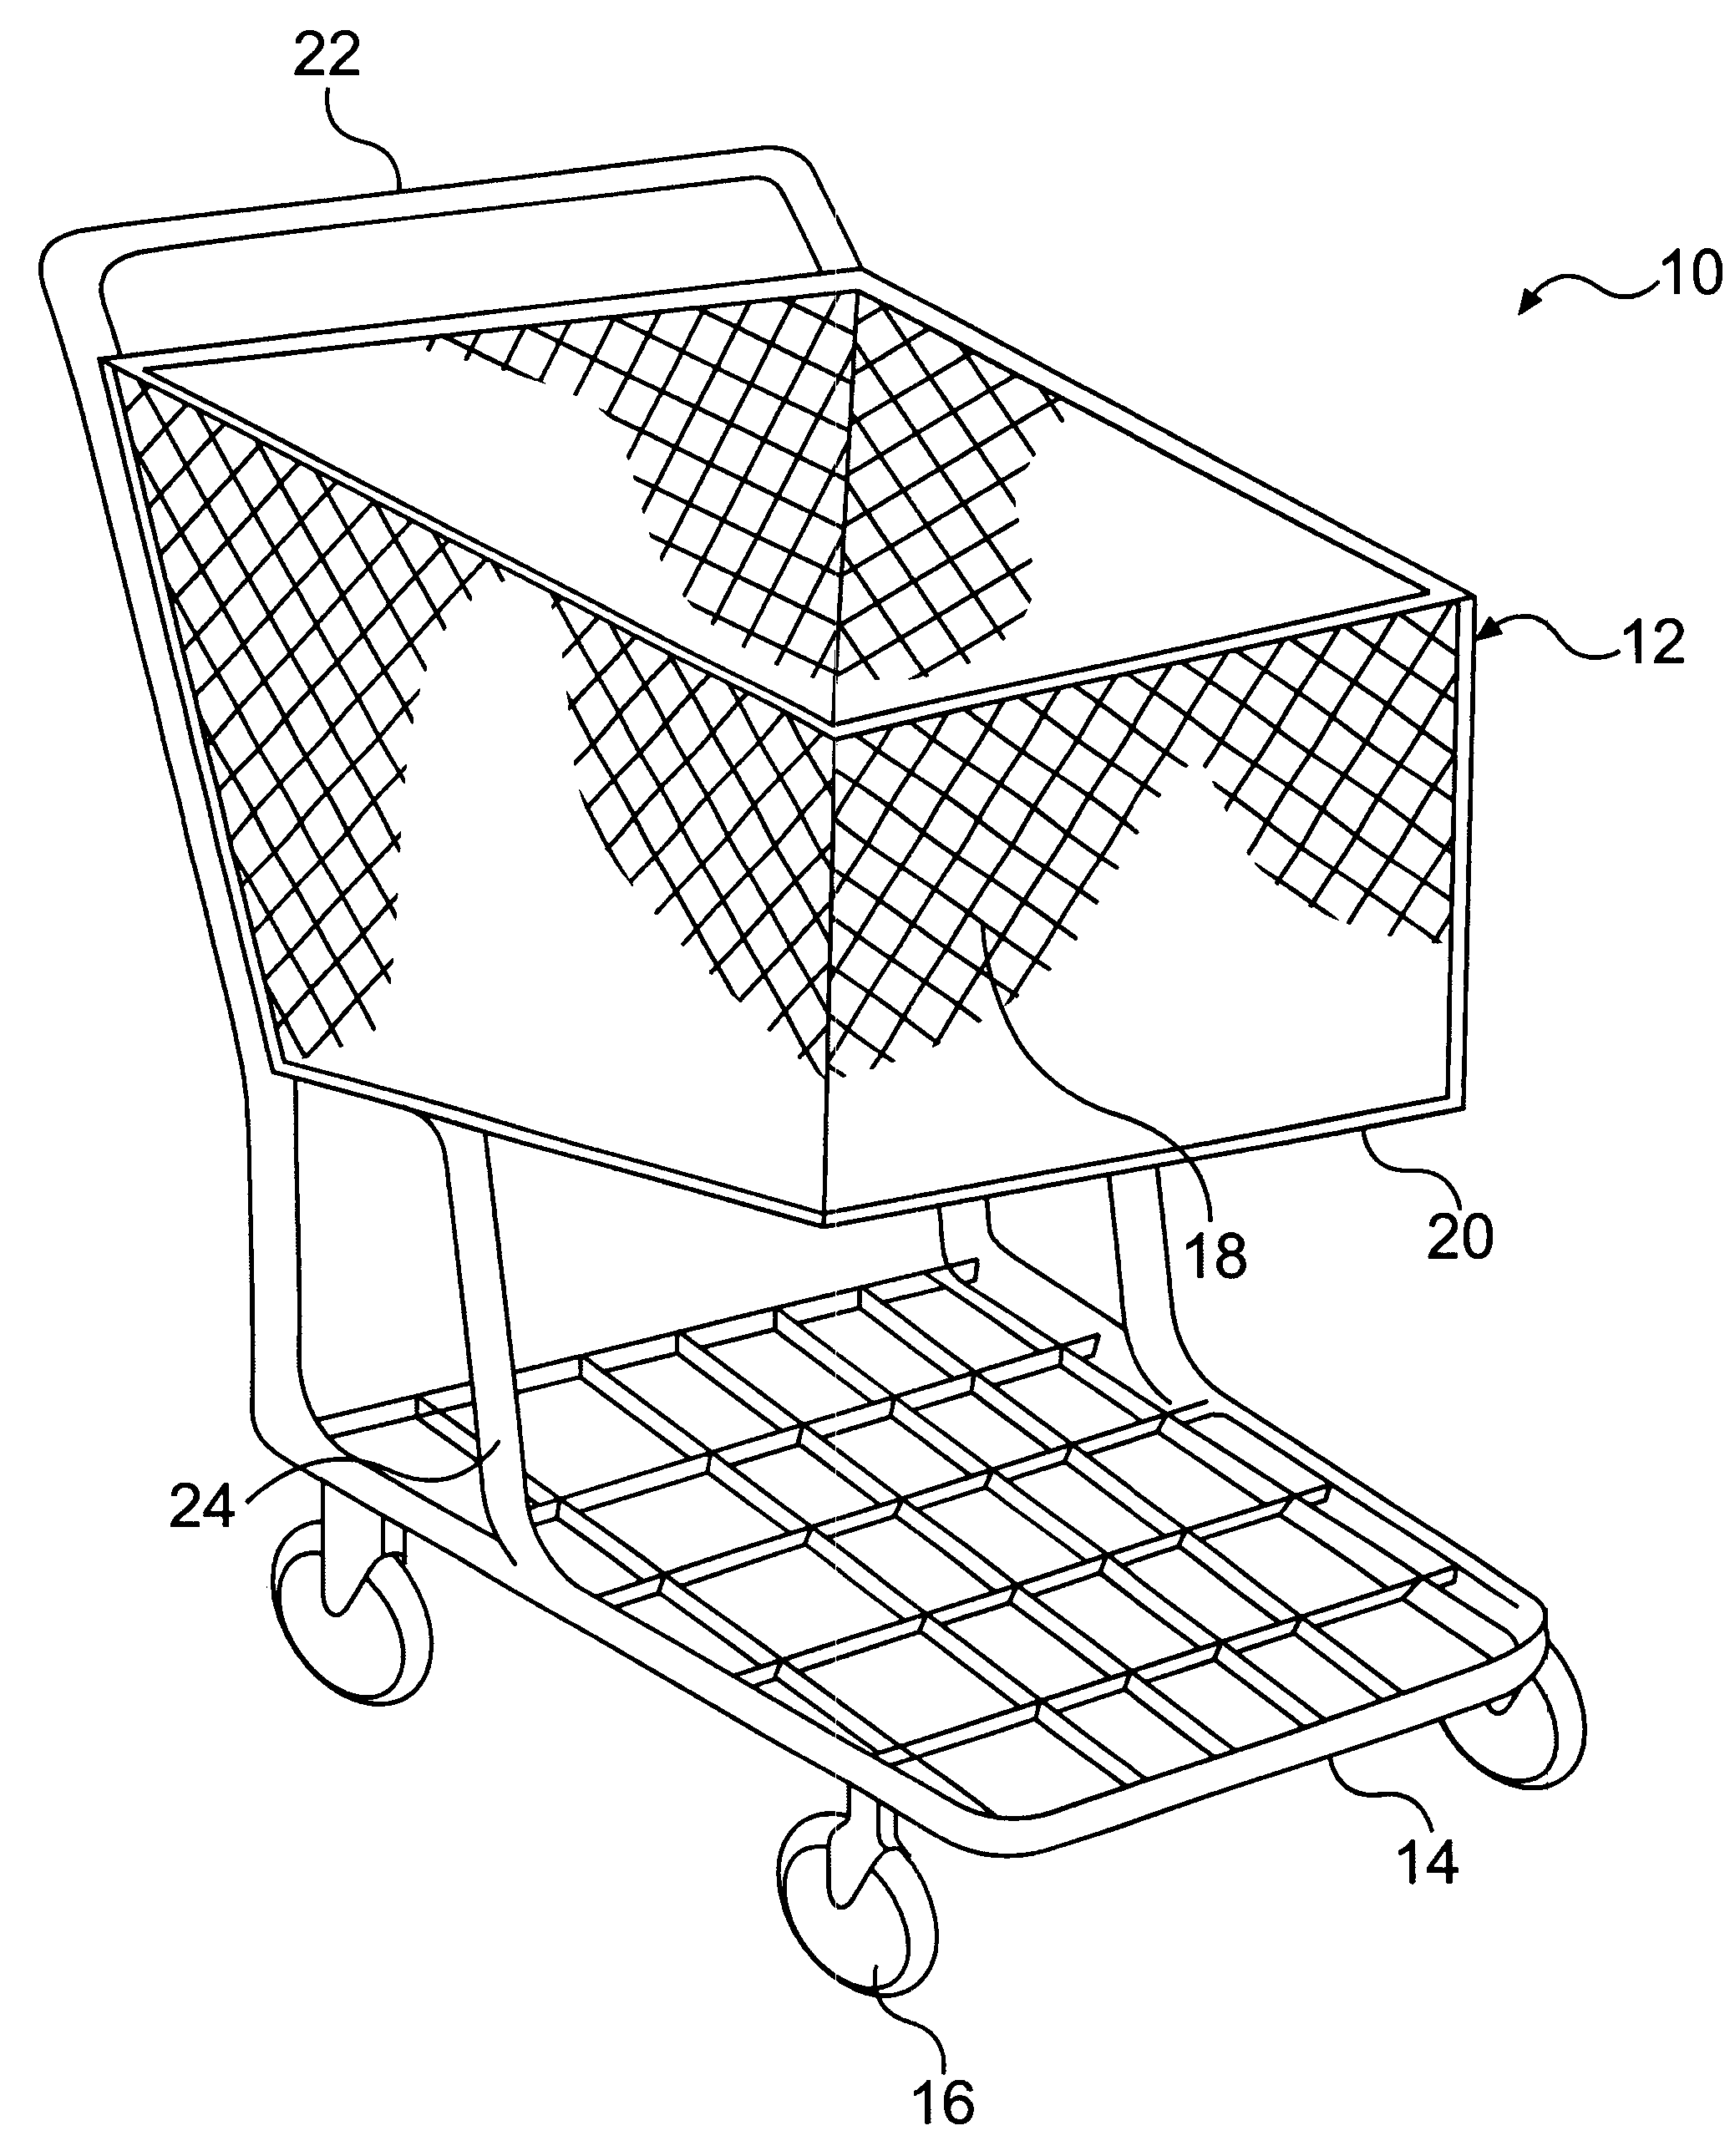 Method of molding a cart using molding processes